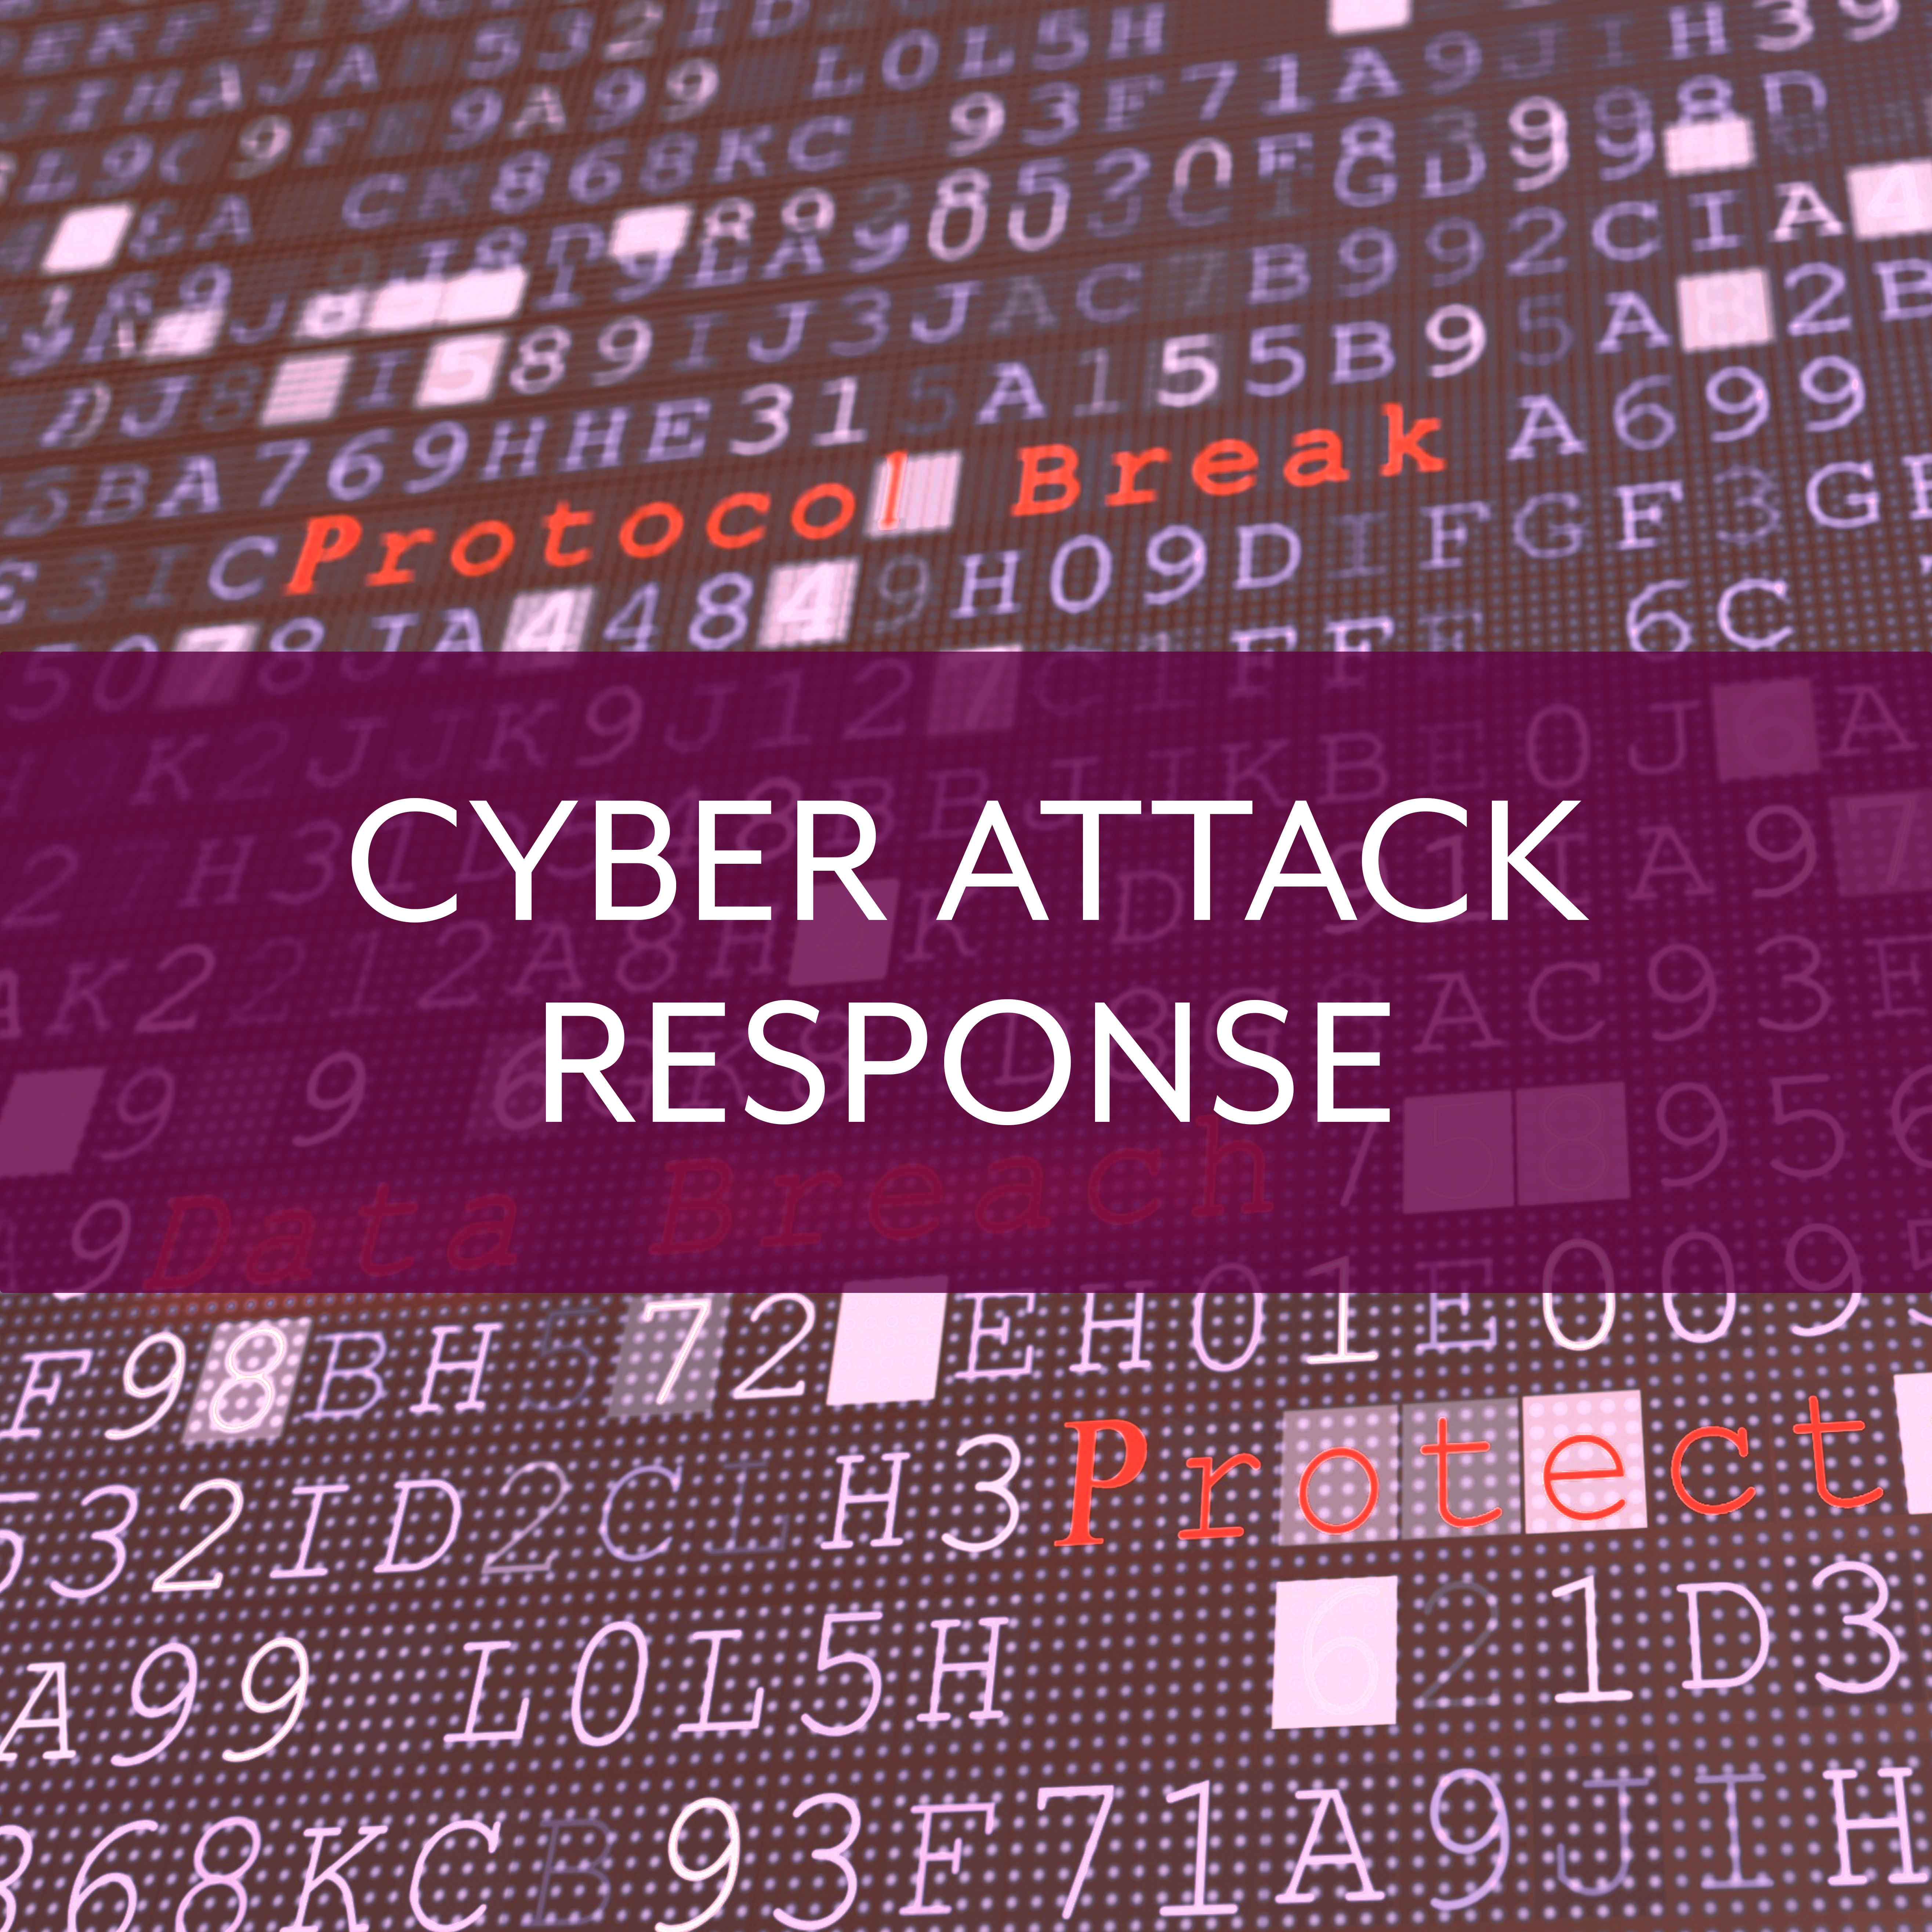 CYBER ATTACK RESPONSE